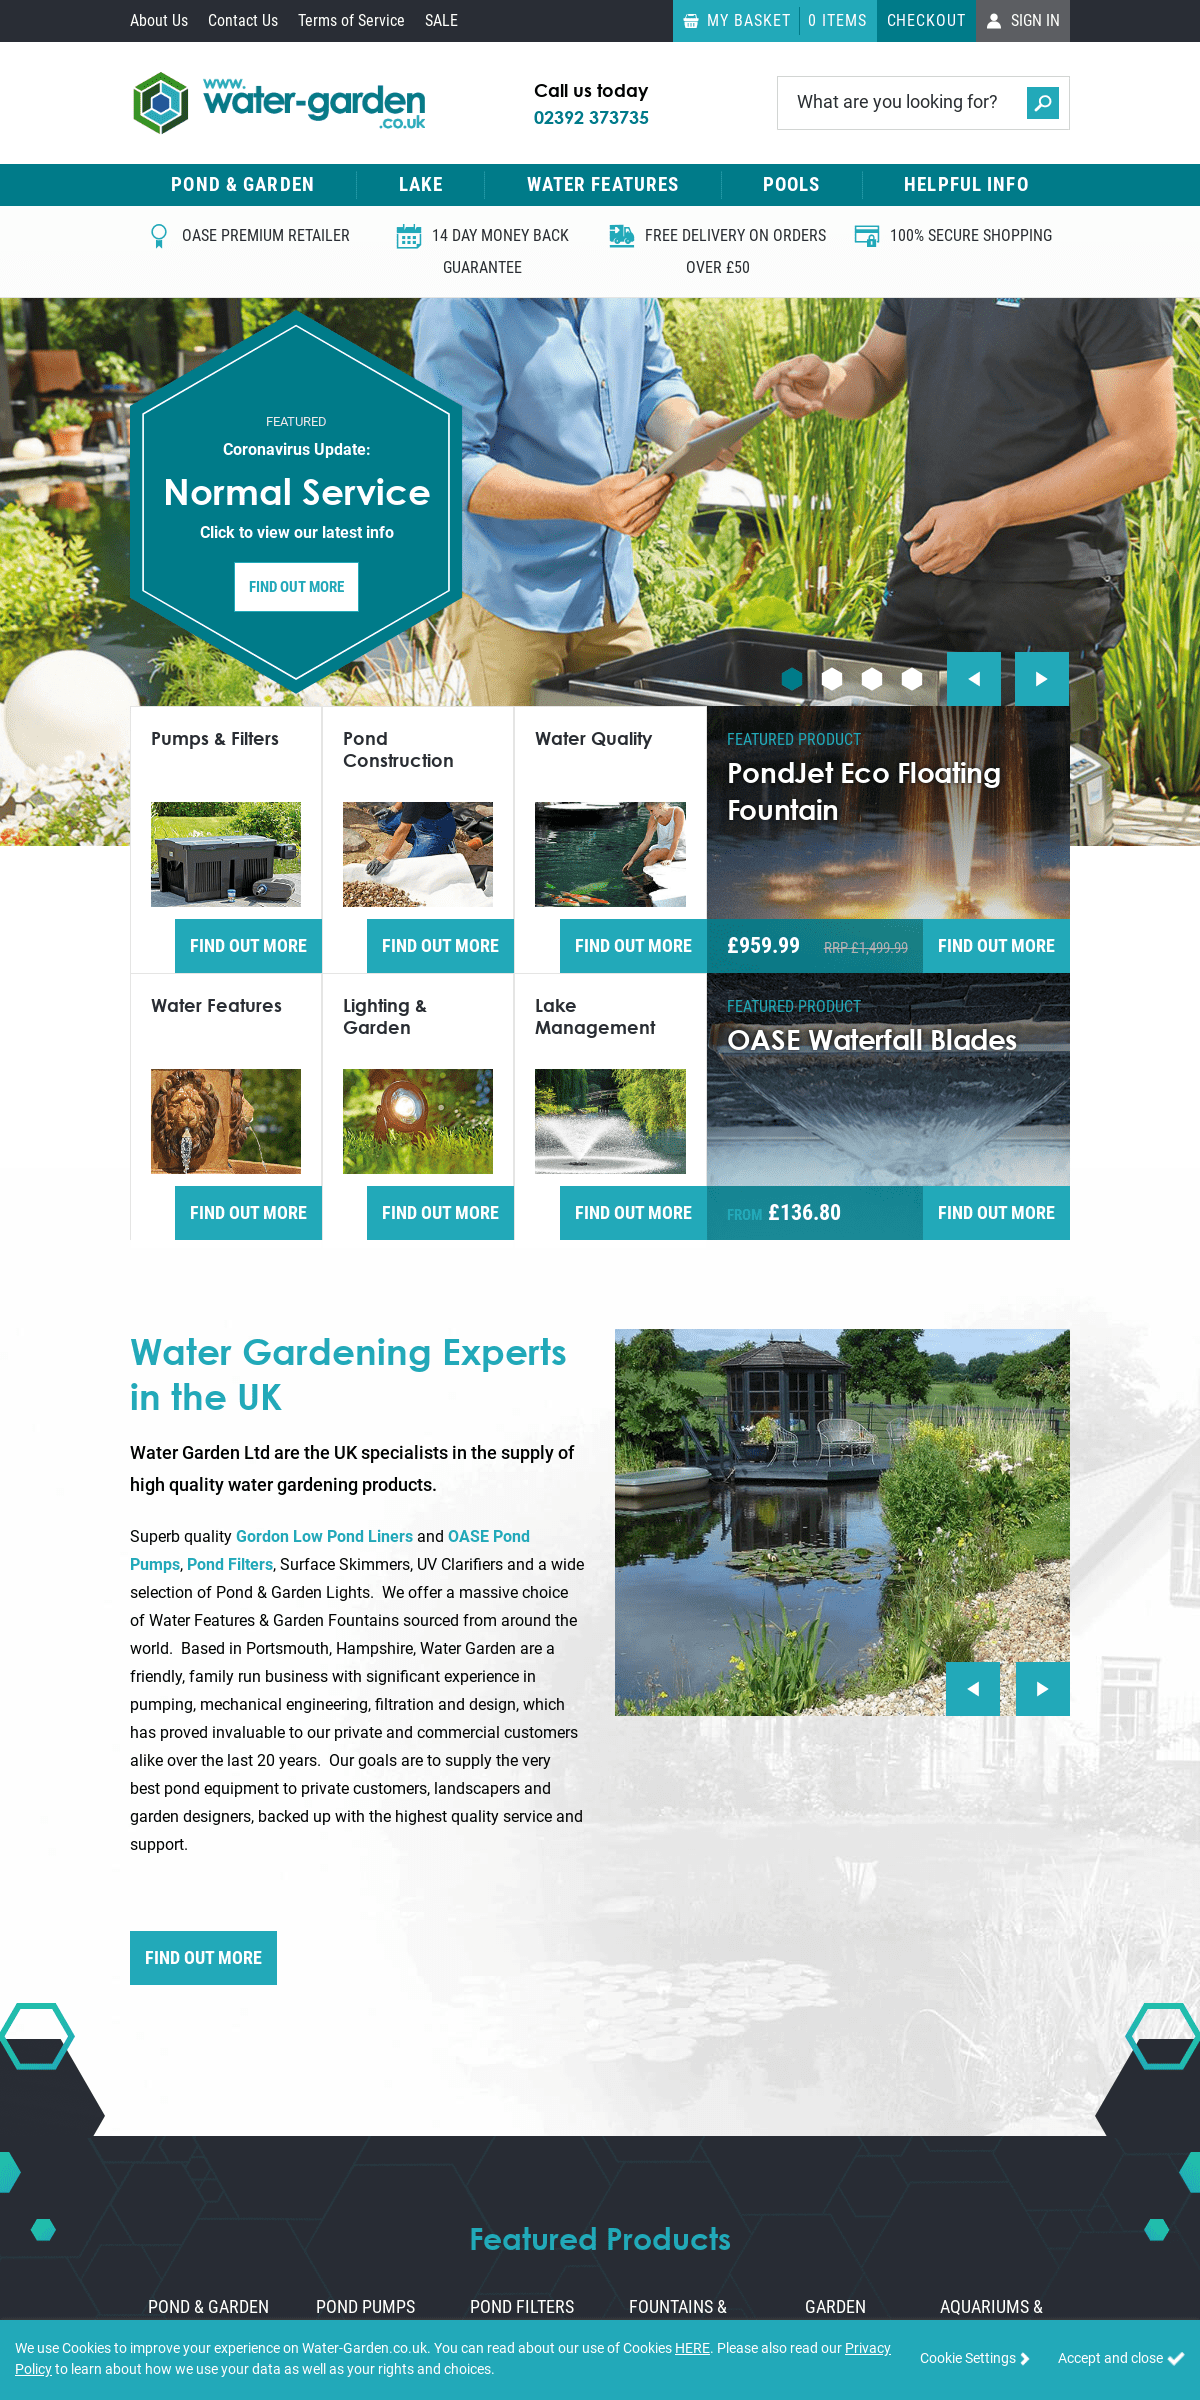 A complete backup of water-garden.co.uk